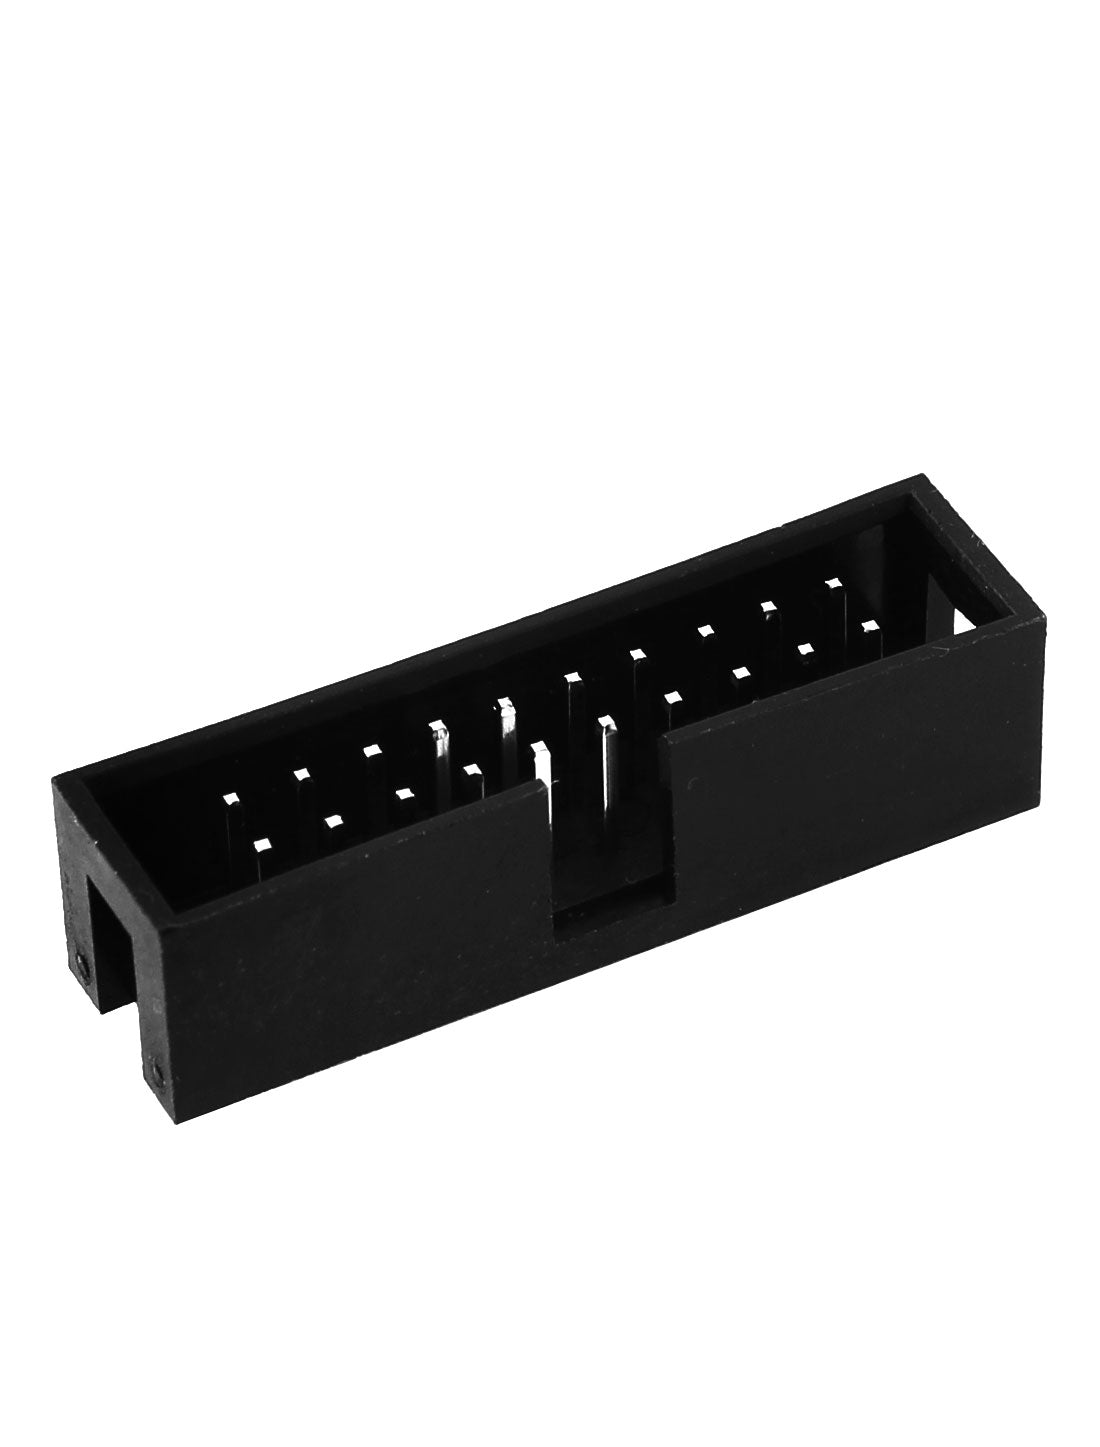 uxcell Uxcell 22pcs 2x10 20-Pin 2.54mm Pitch Straight Box Header Connector IDC Male Sockets